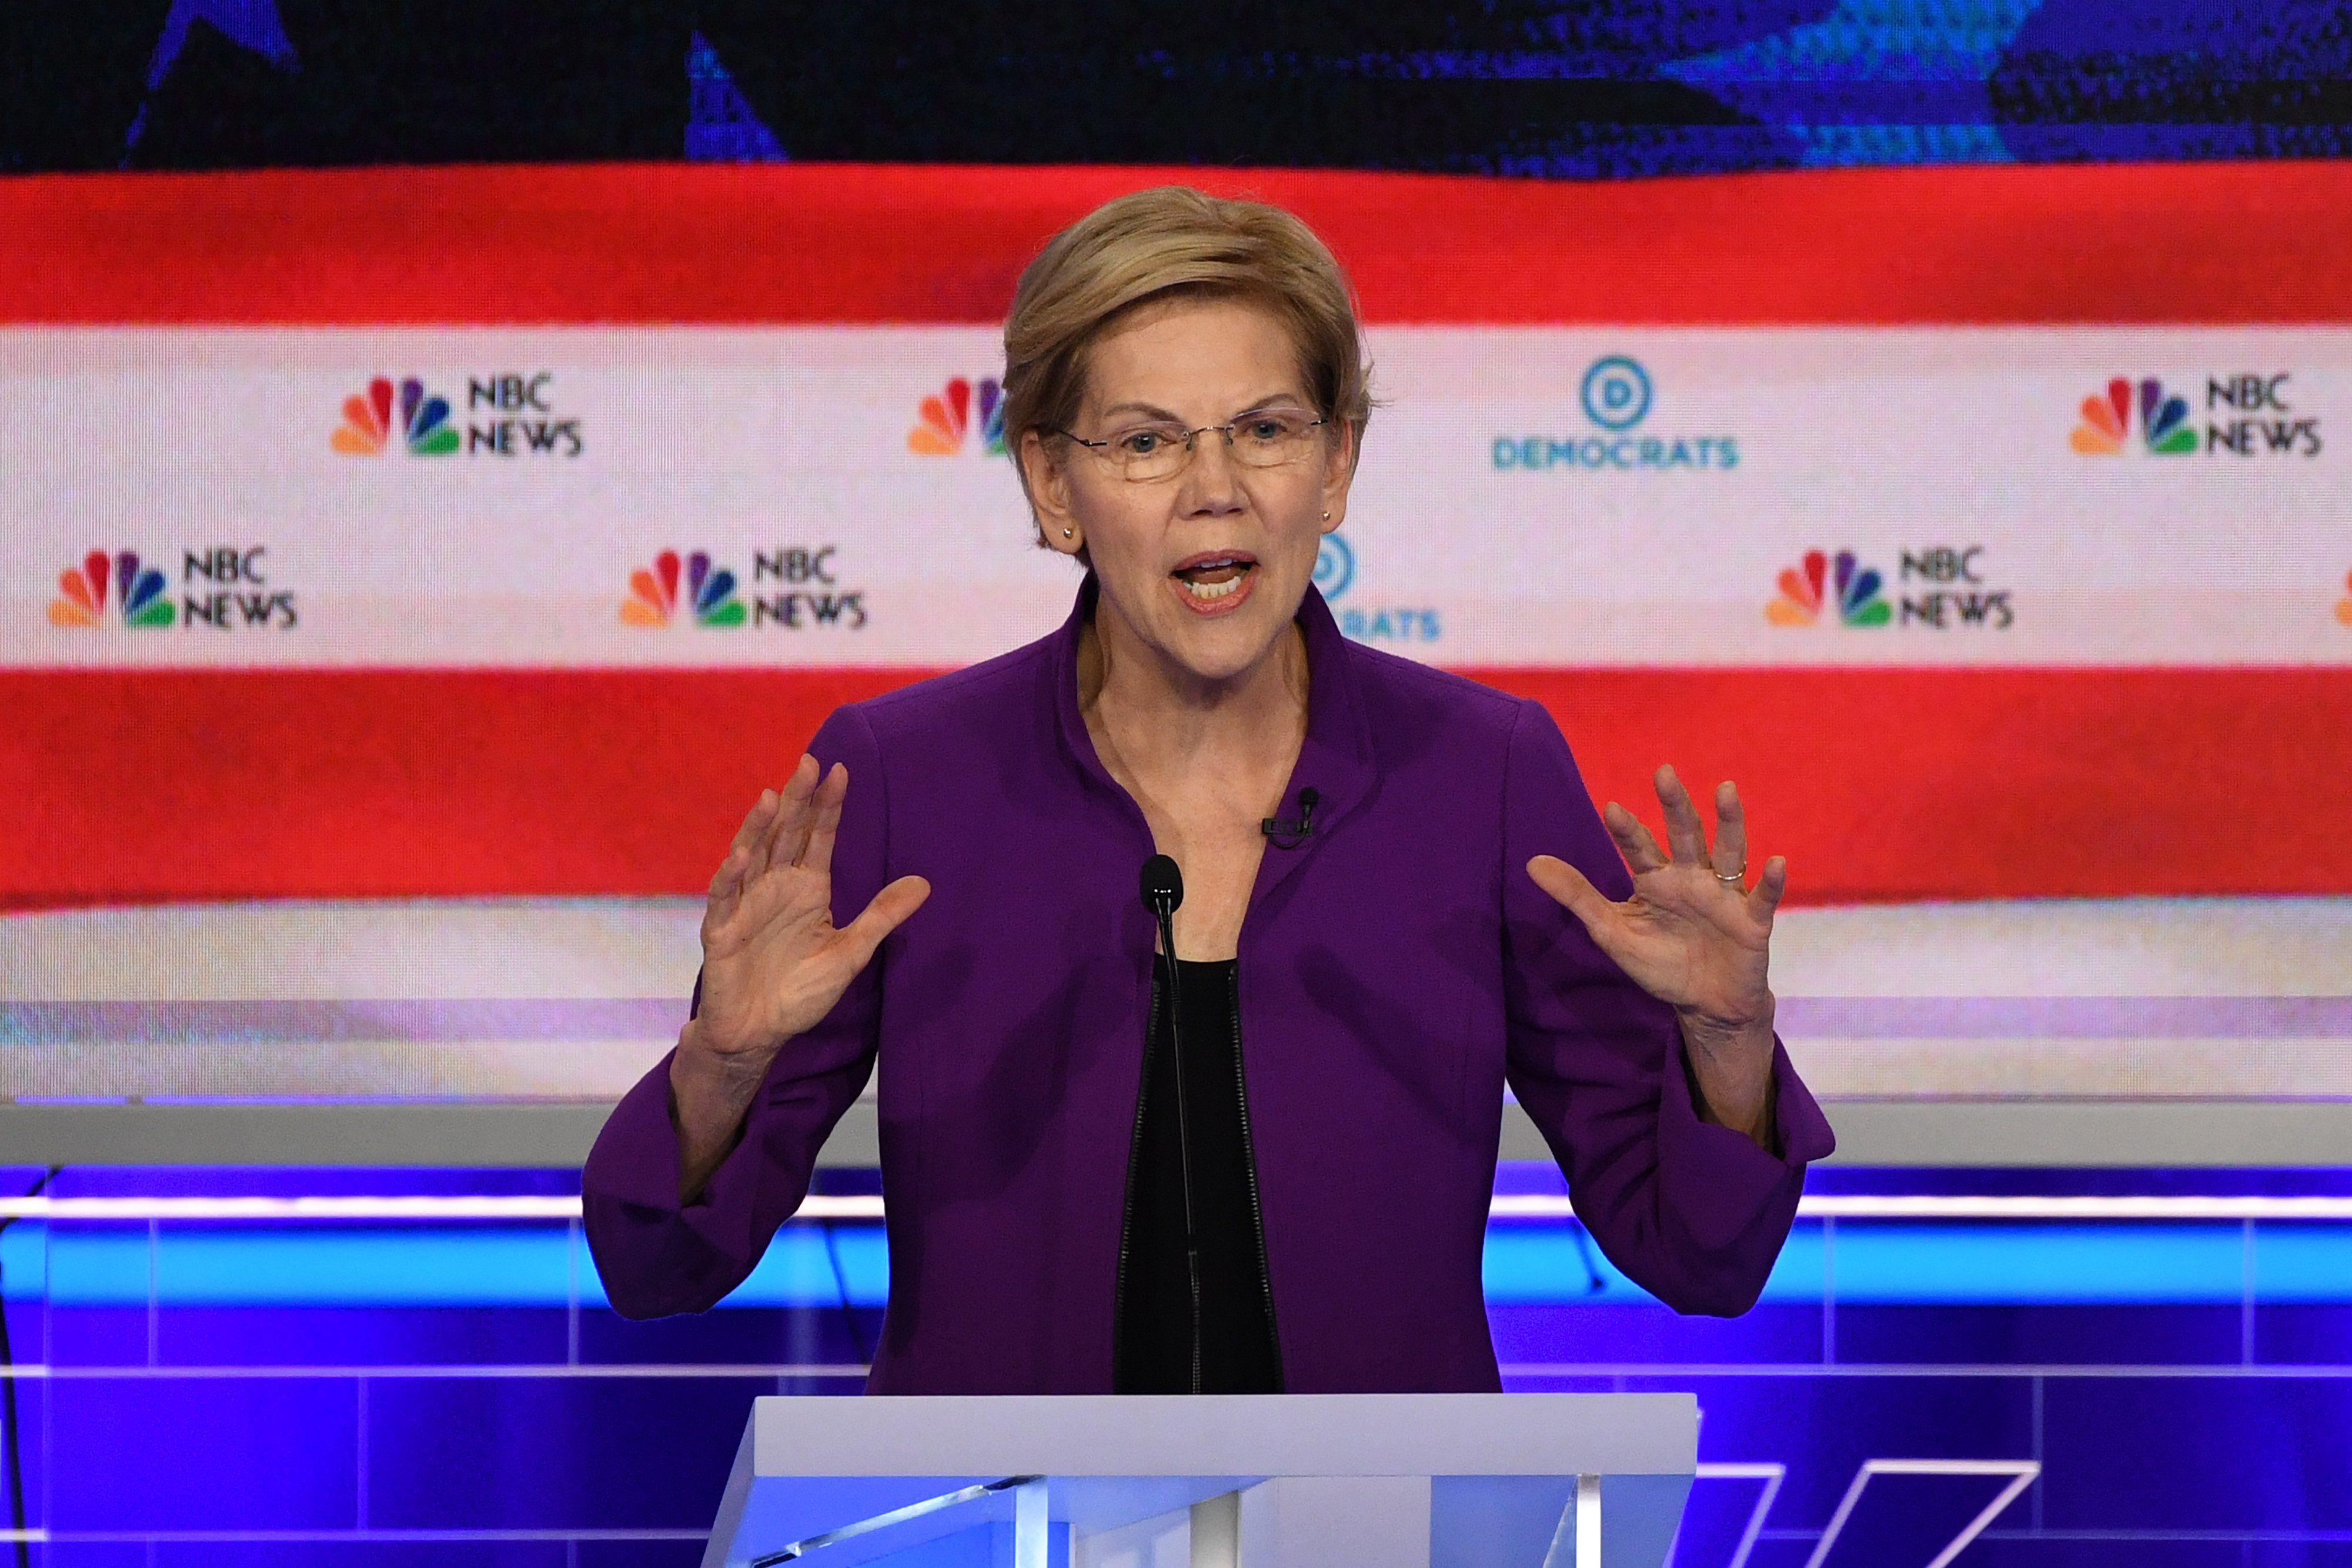 Democratic presidential hopeful US Senator from Massachusetts Elizabeth Warren participates in the first Democratic primary debate of the 2020 presidential campaign season hosted by NBC News at the Adrienne Arsht Center for the Performing Arts in Miami, Florida, June 26, 2019. 